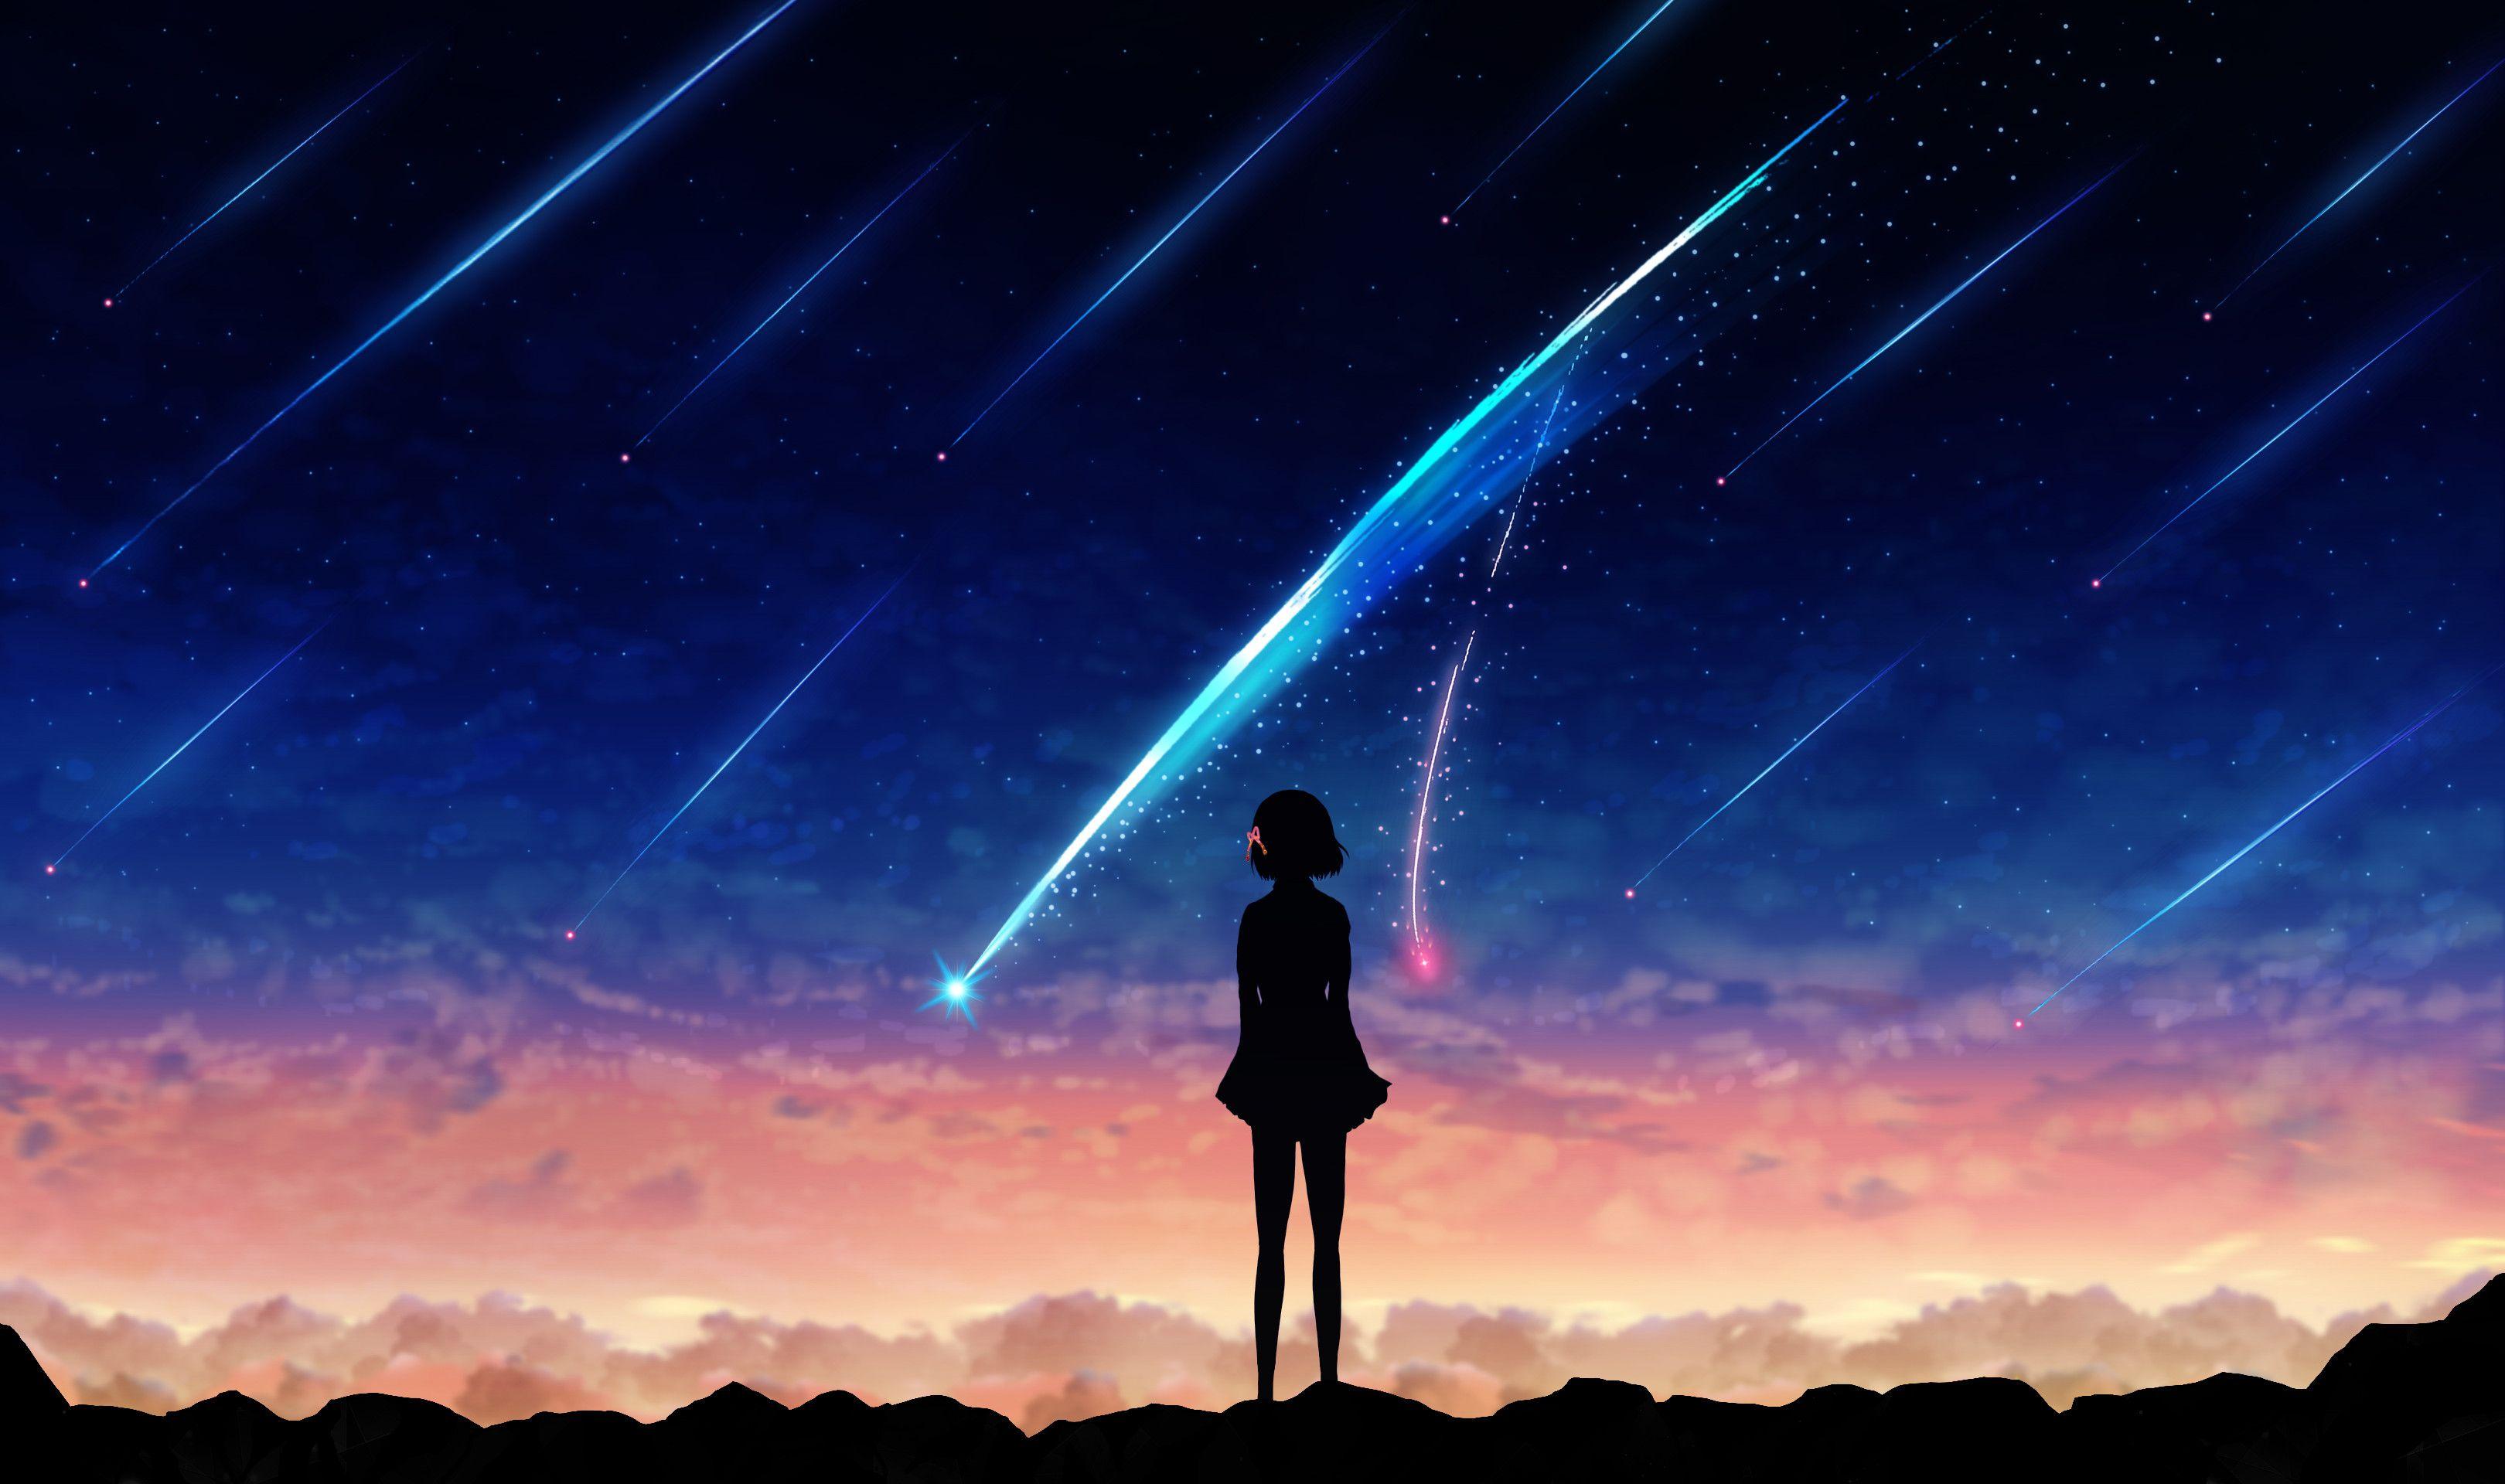 Your name anime HD phone wallpaper  Peakpx